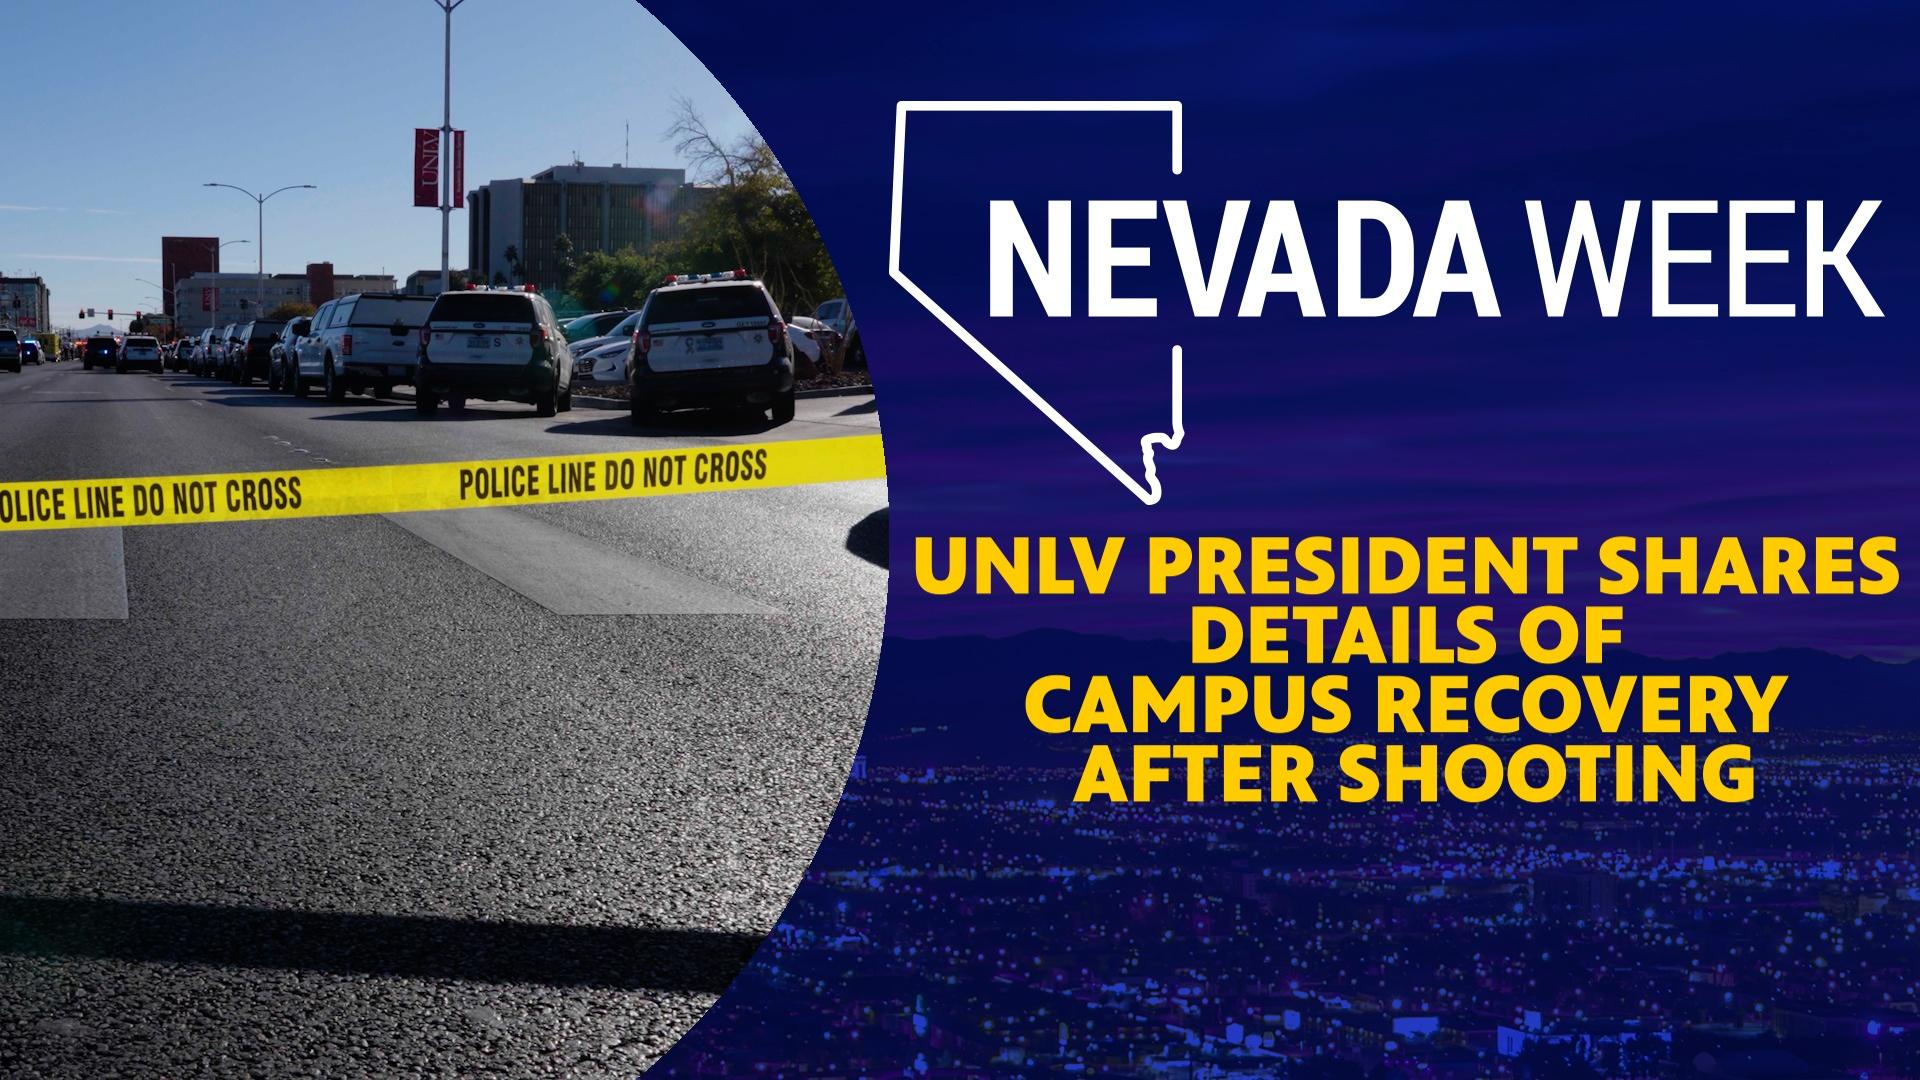 UNLV President shares details of campus recovery after shooting